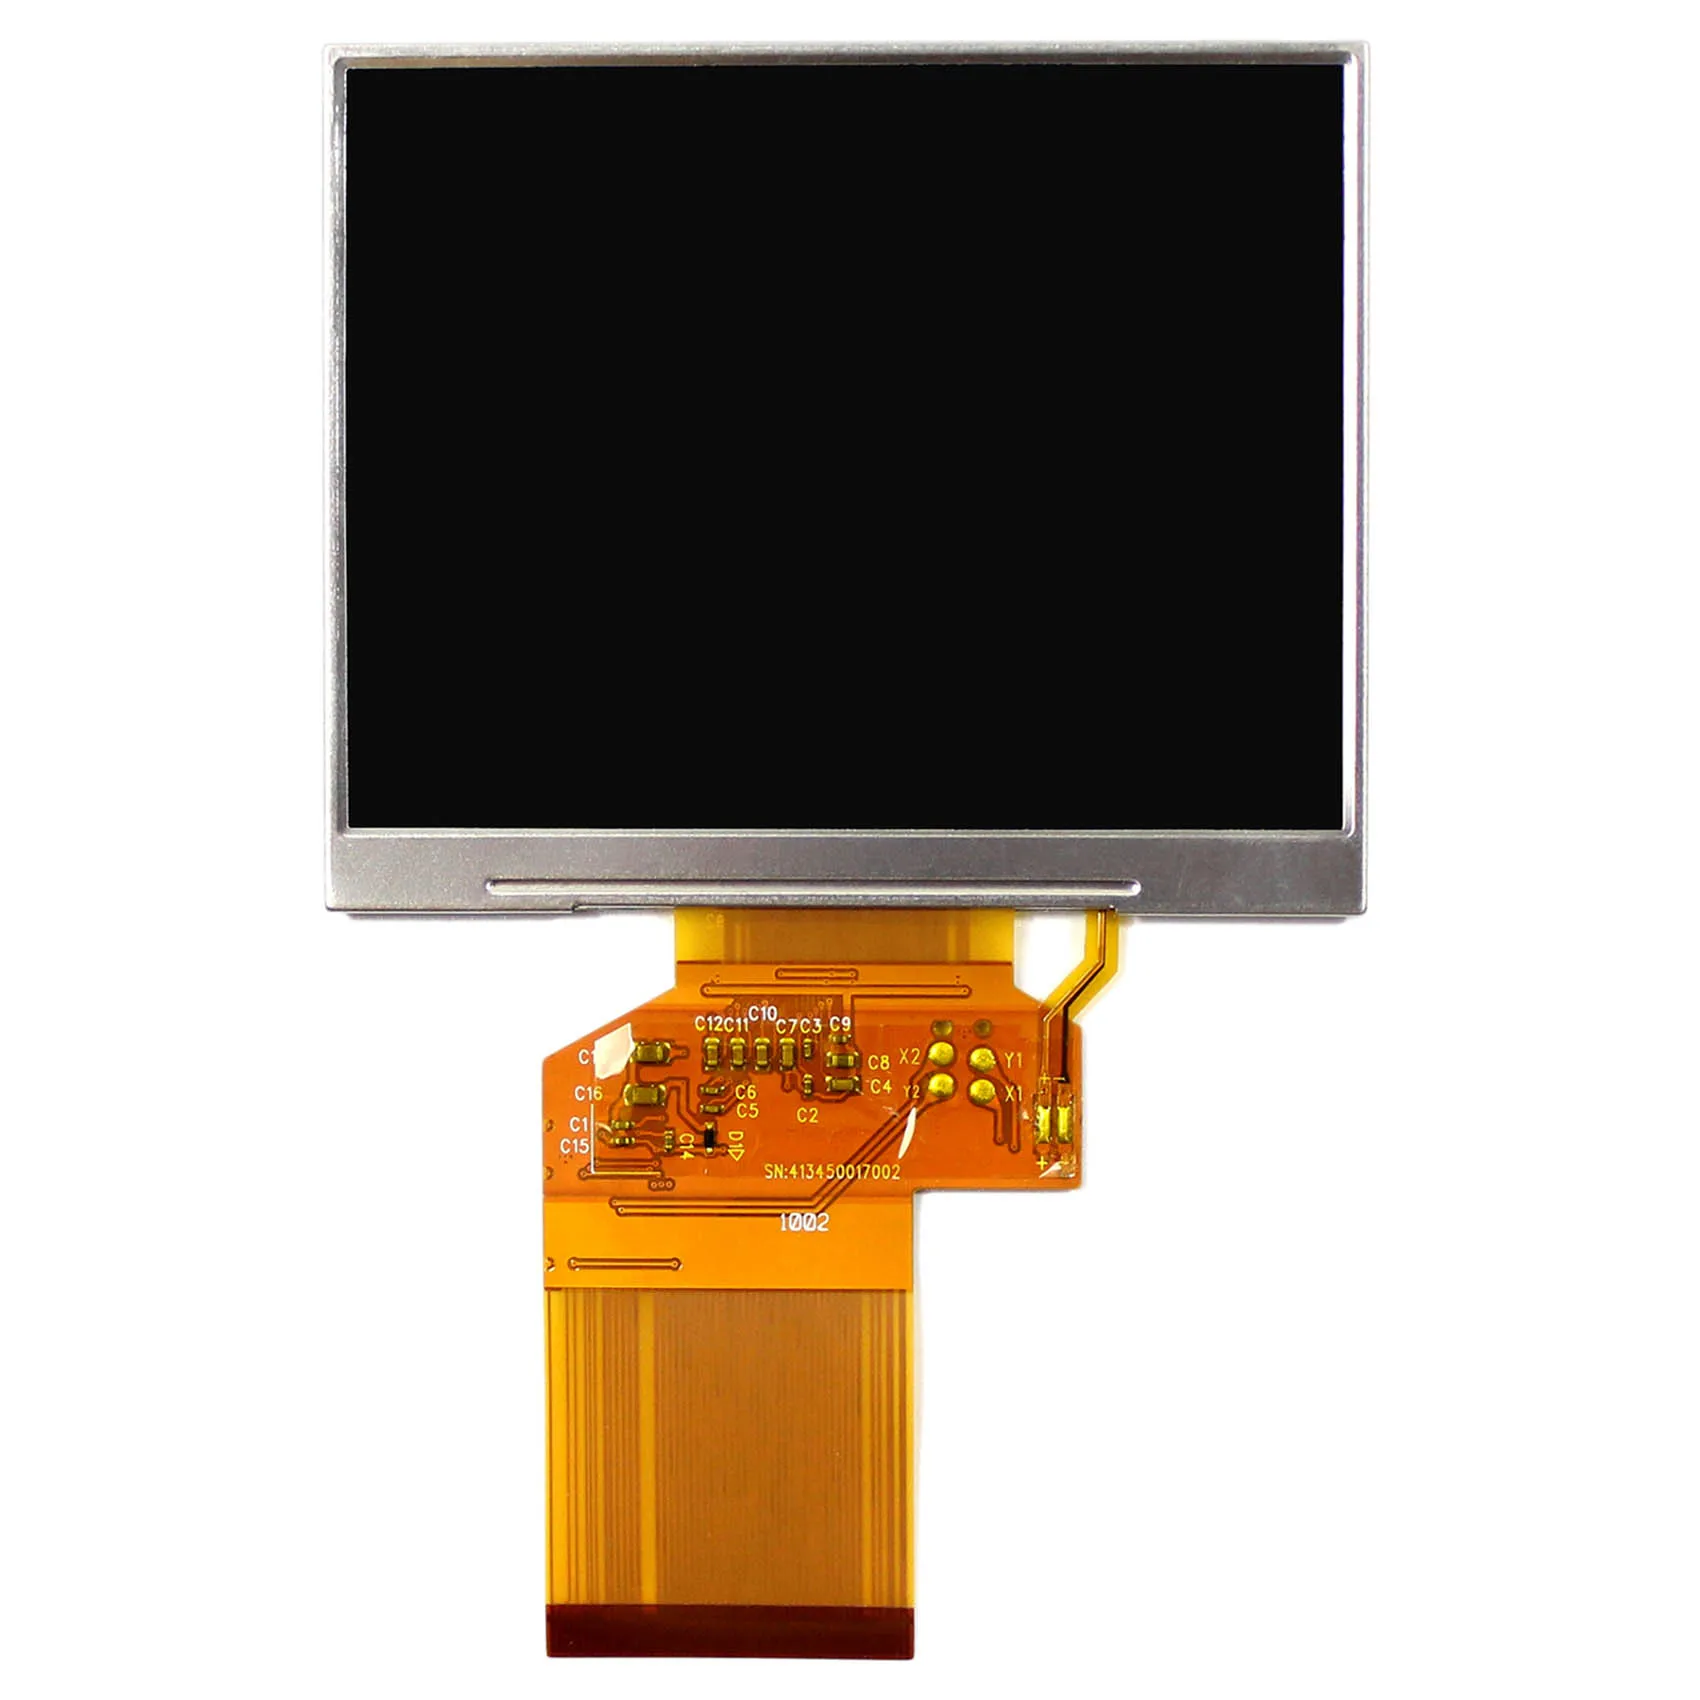 VSDISPLAY 3.5inch Touch Panel For 3.5" LQ035NC111 320x240 LCD Screen